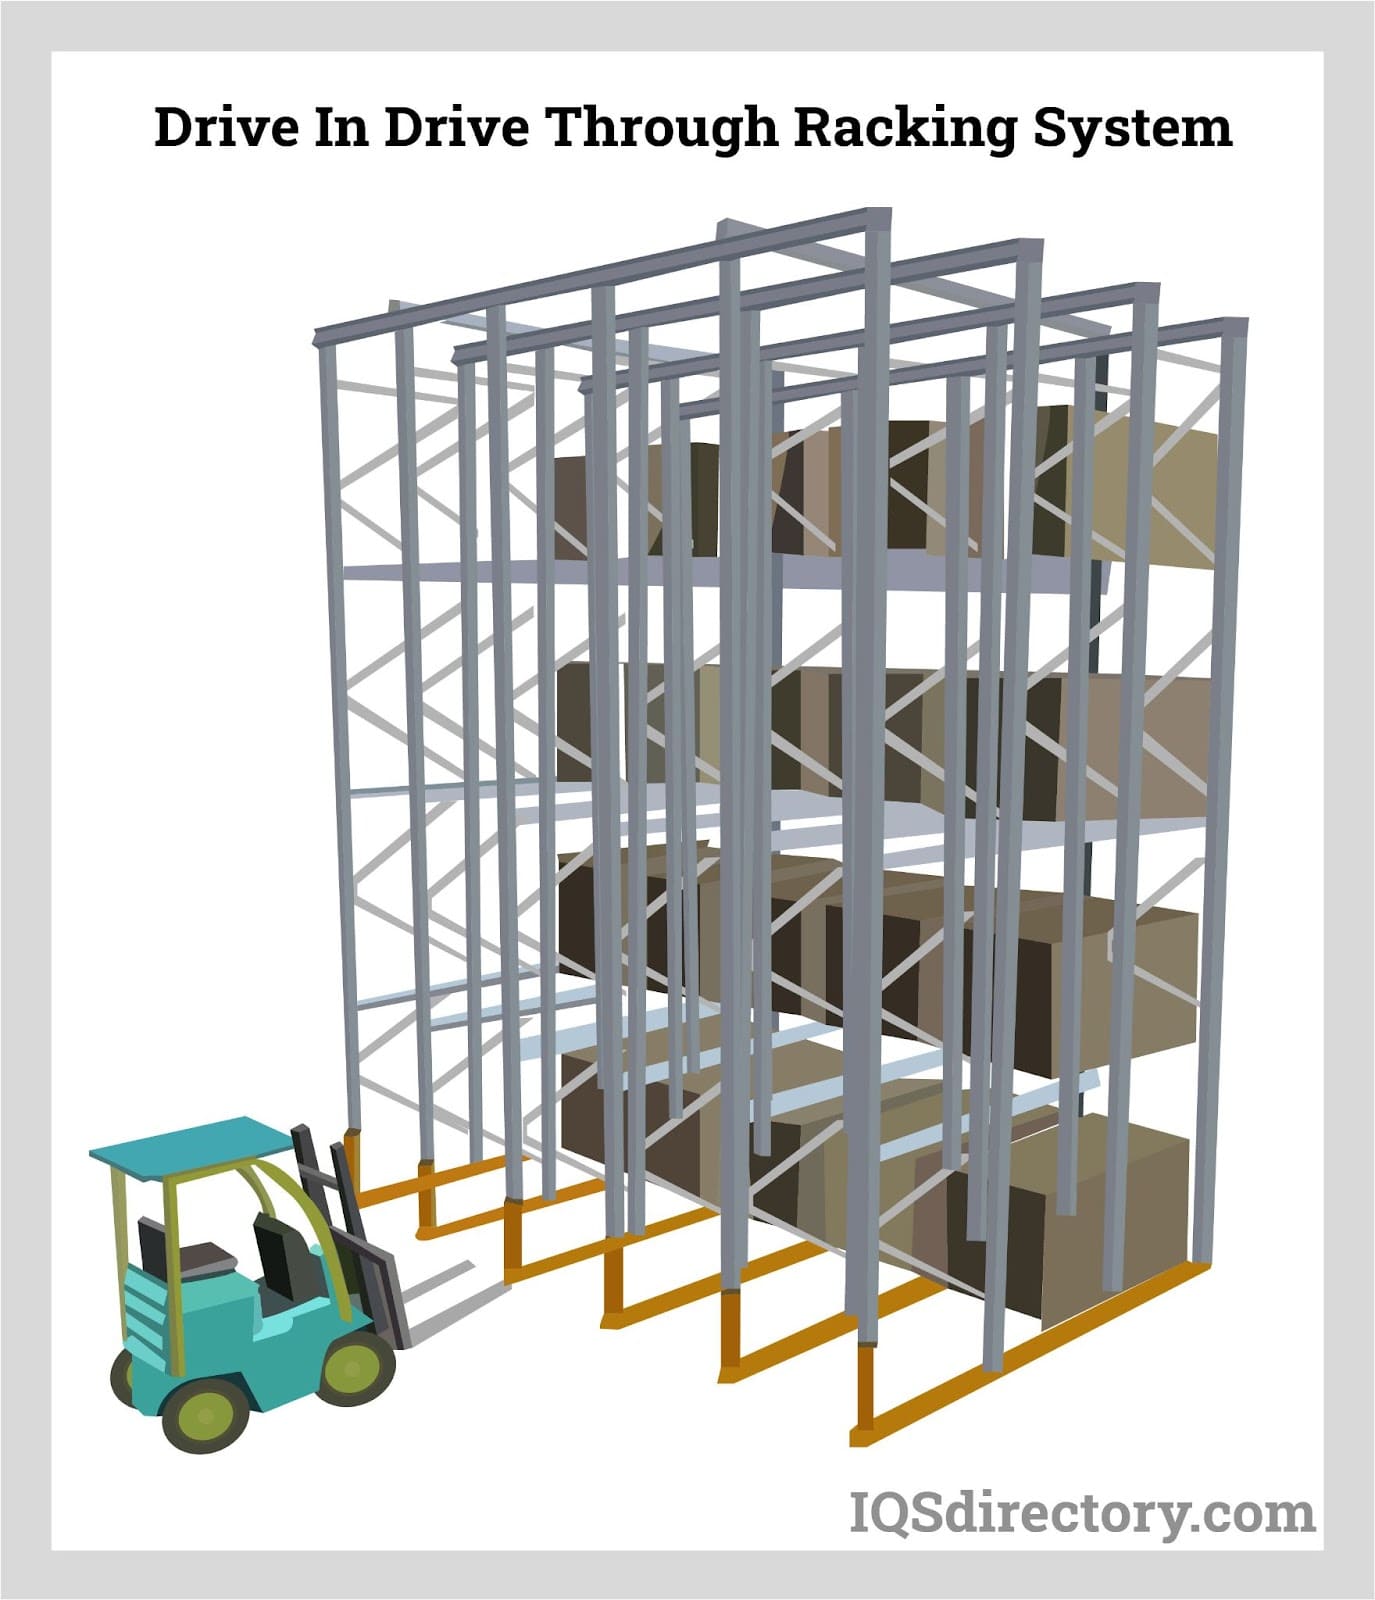 Drive In Drive Through Racking System